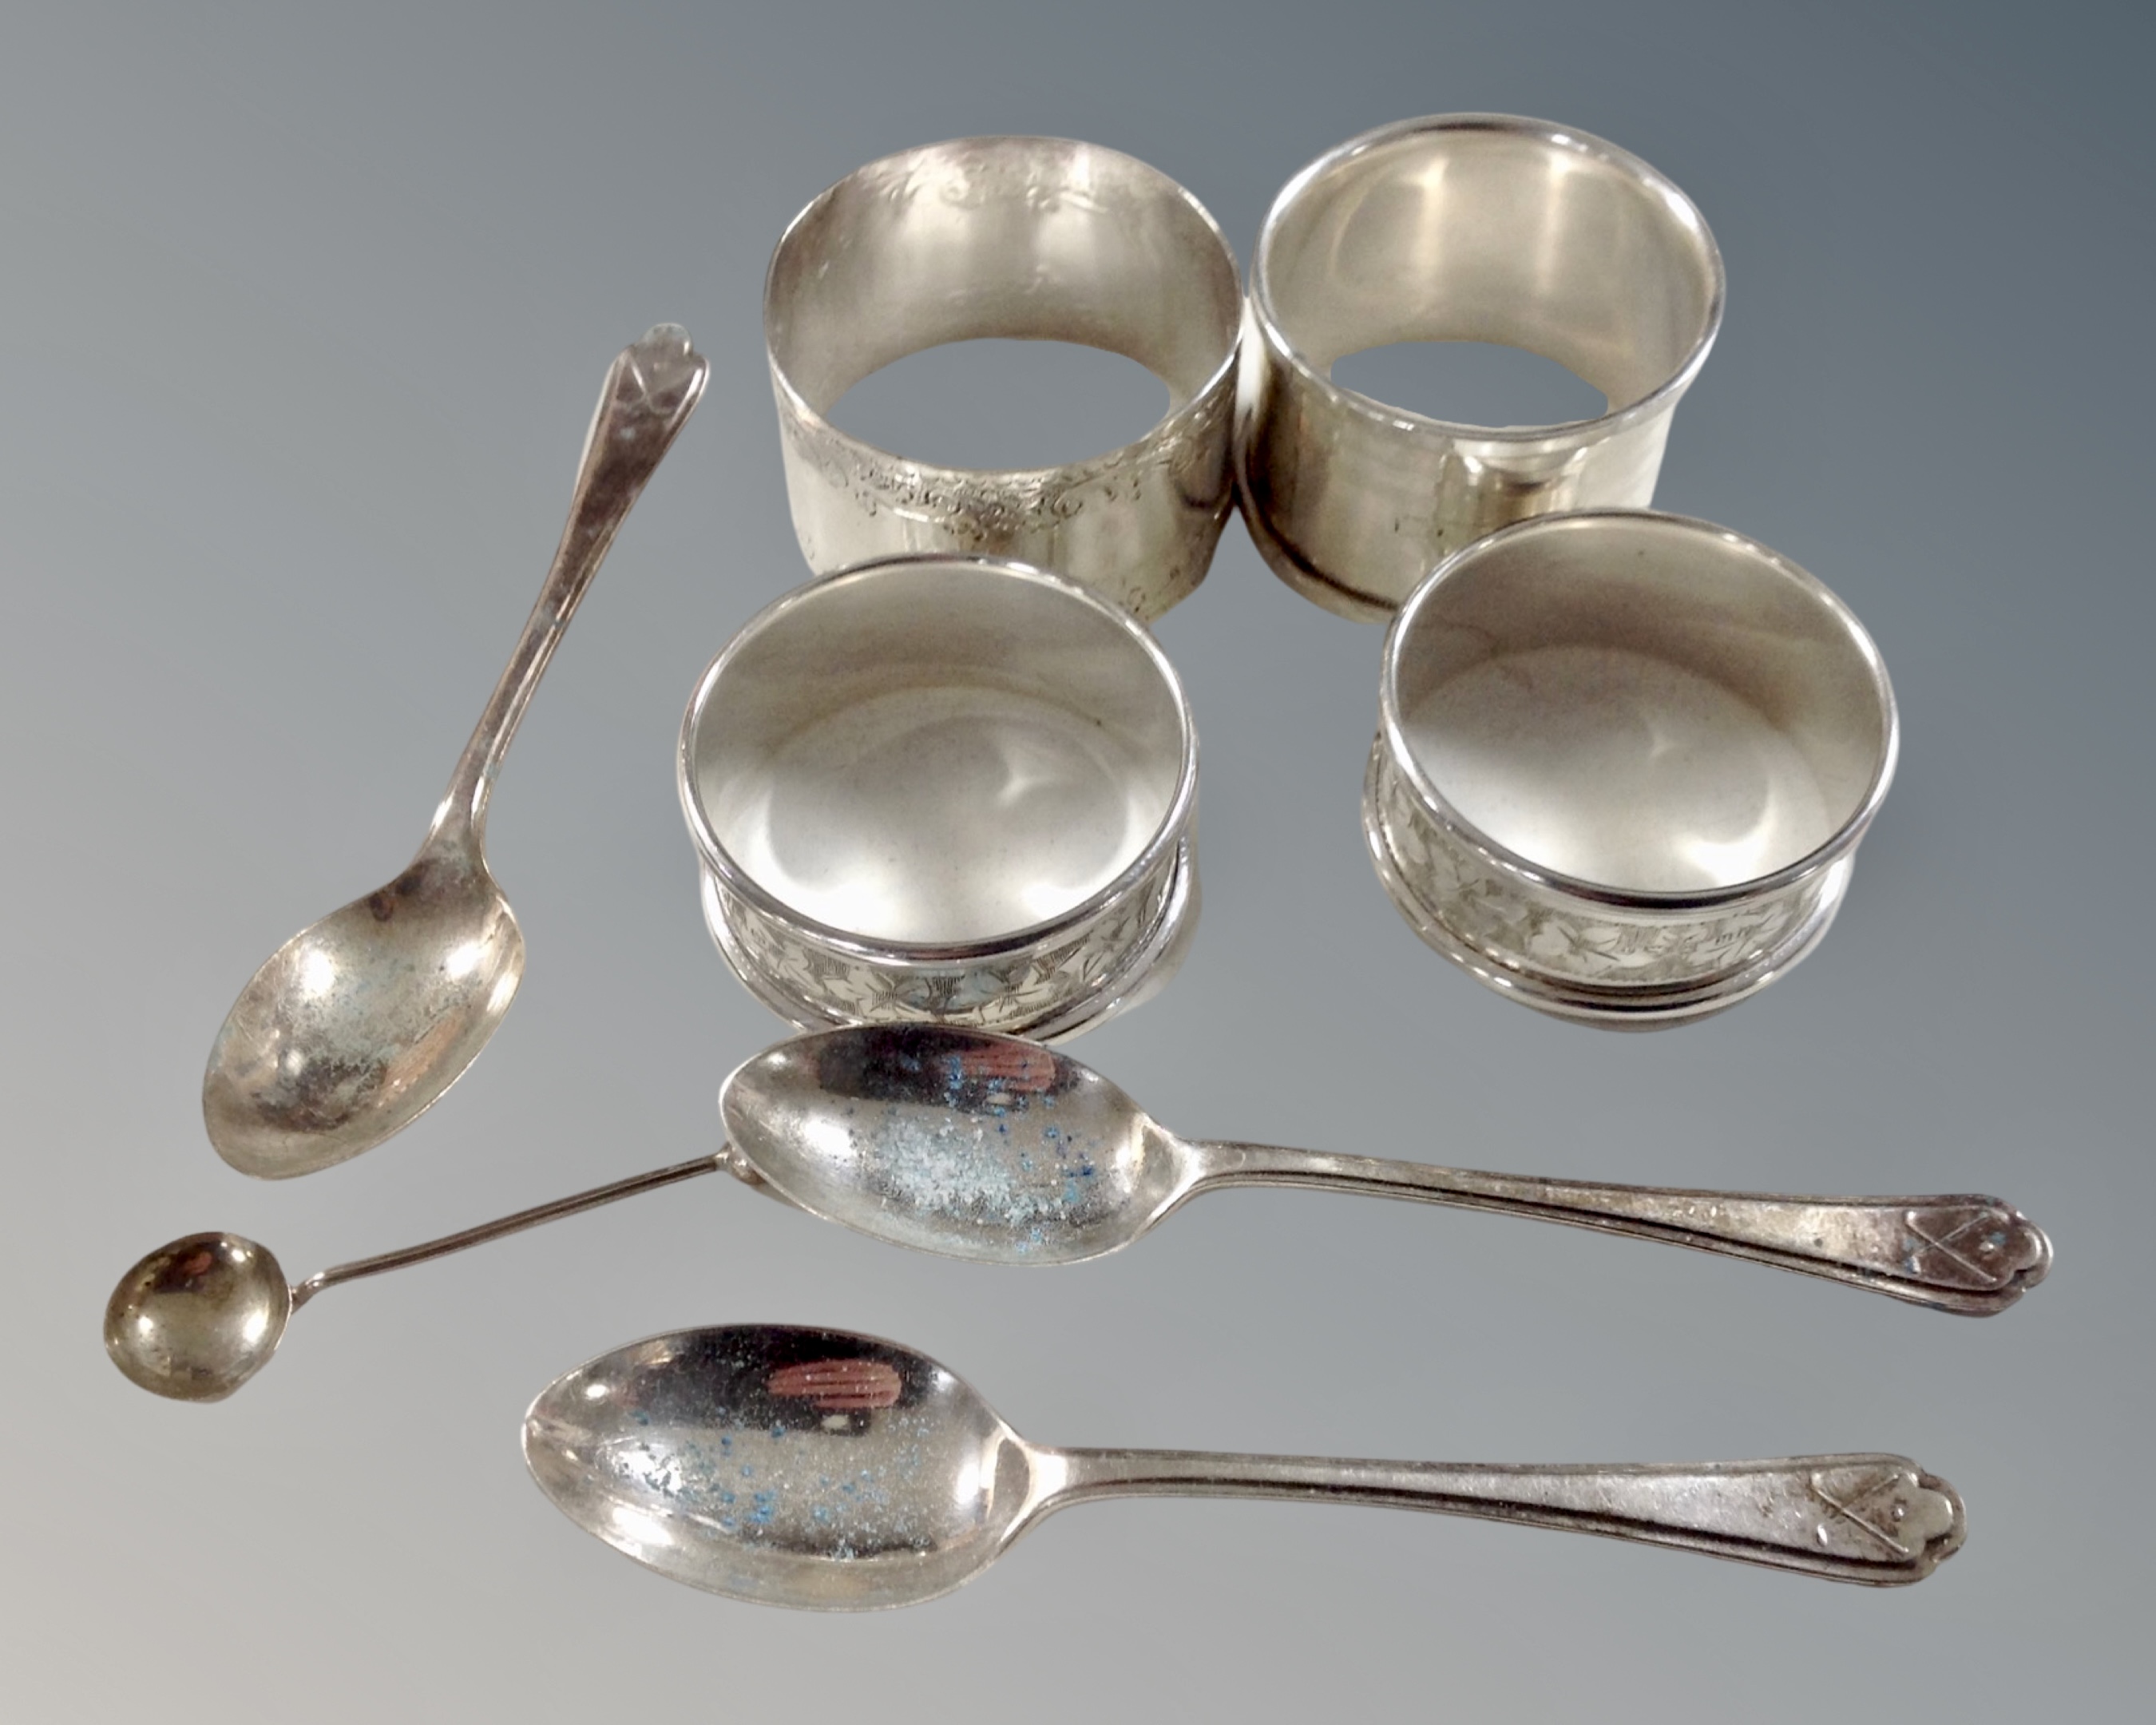 Four silver napkin rings together with three silver teaspoons and a silver mustard spoon.